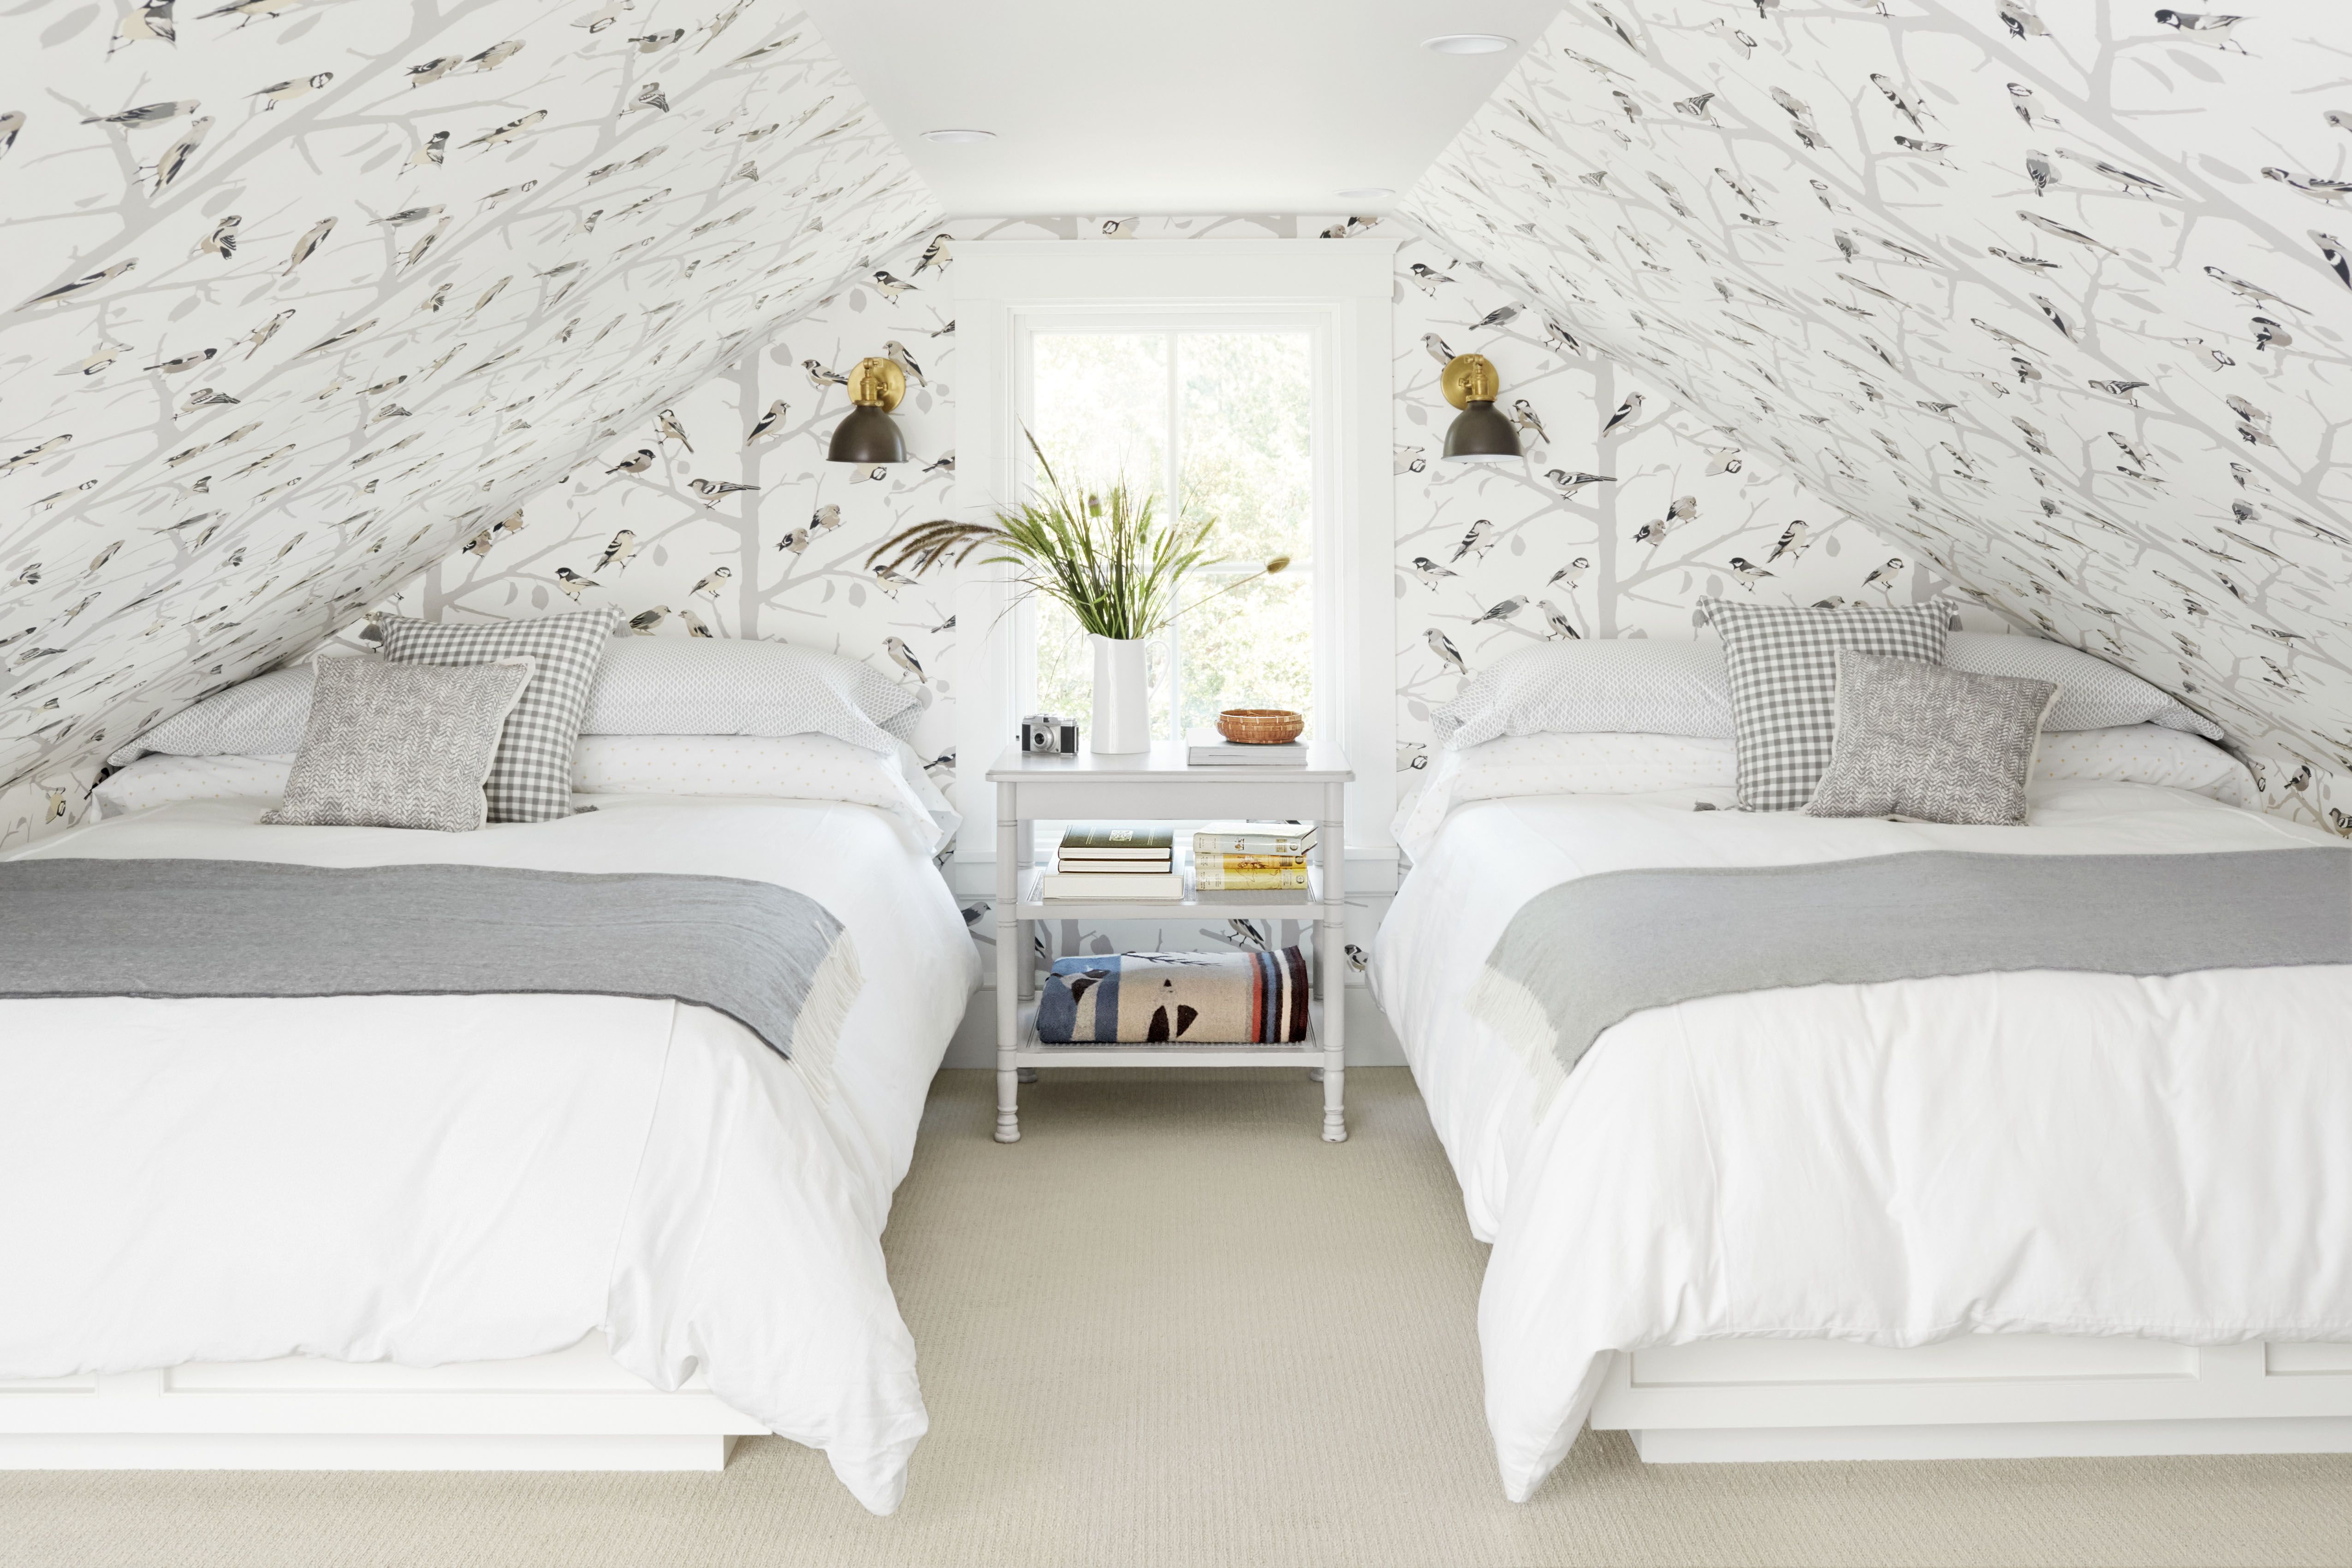 13 Colors That Go With Gray Best To Walls - What Colour Bedding Goes With Light Grey Walls